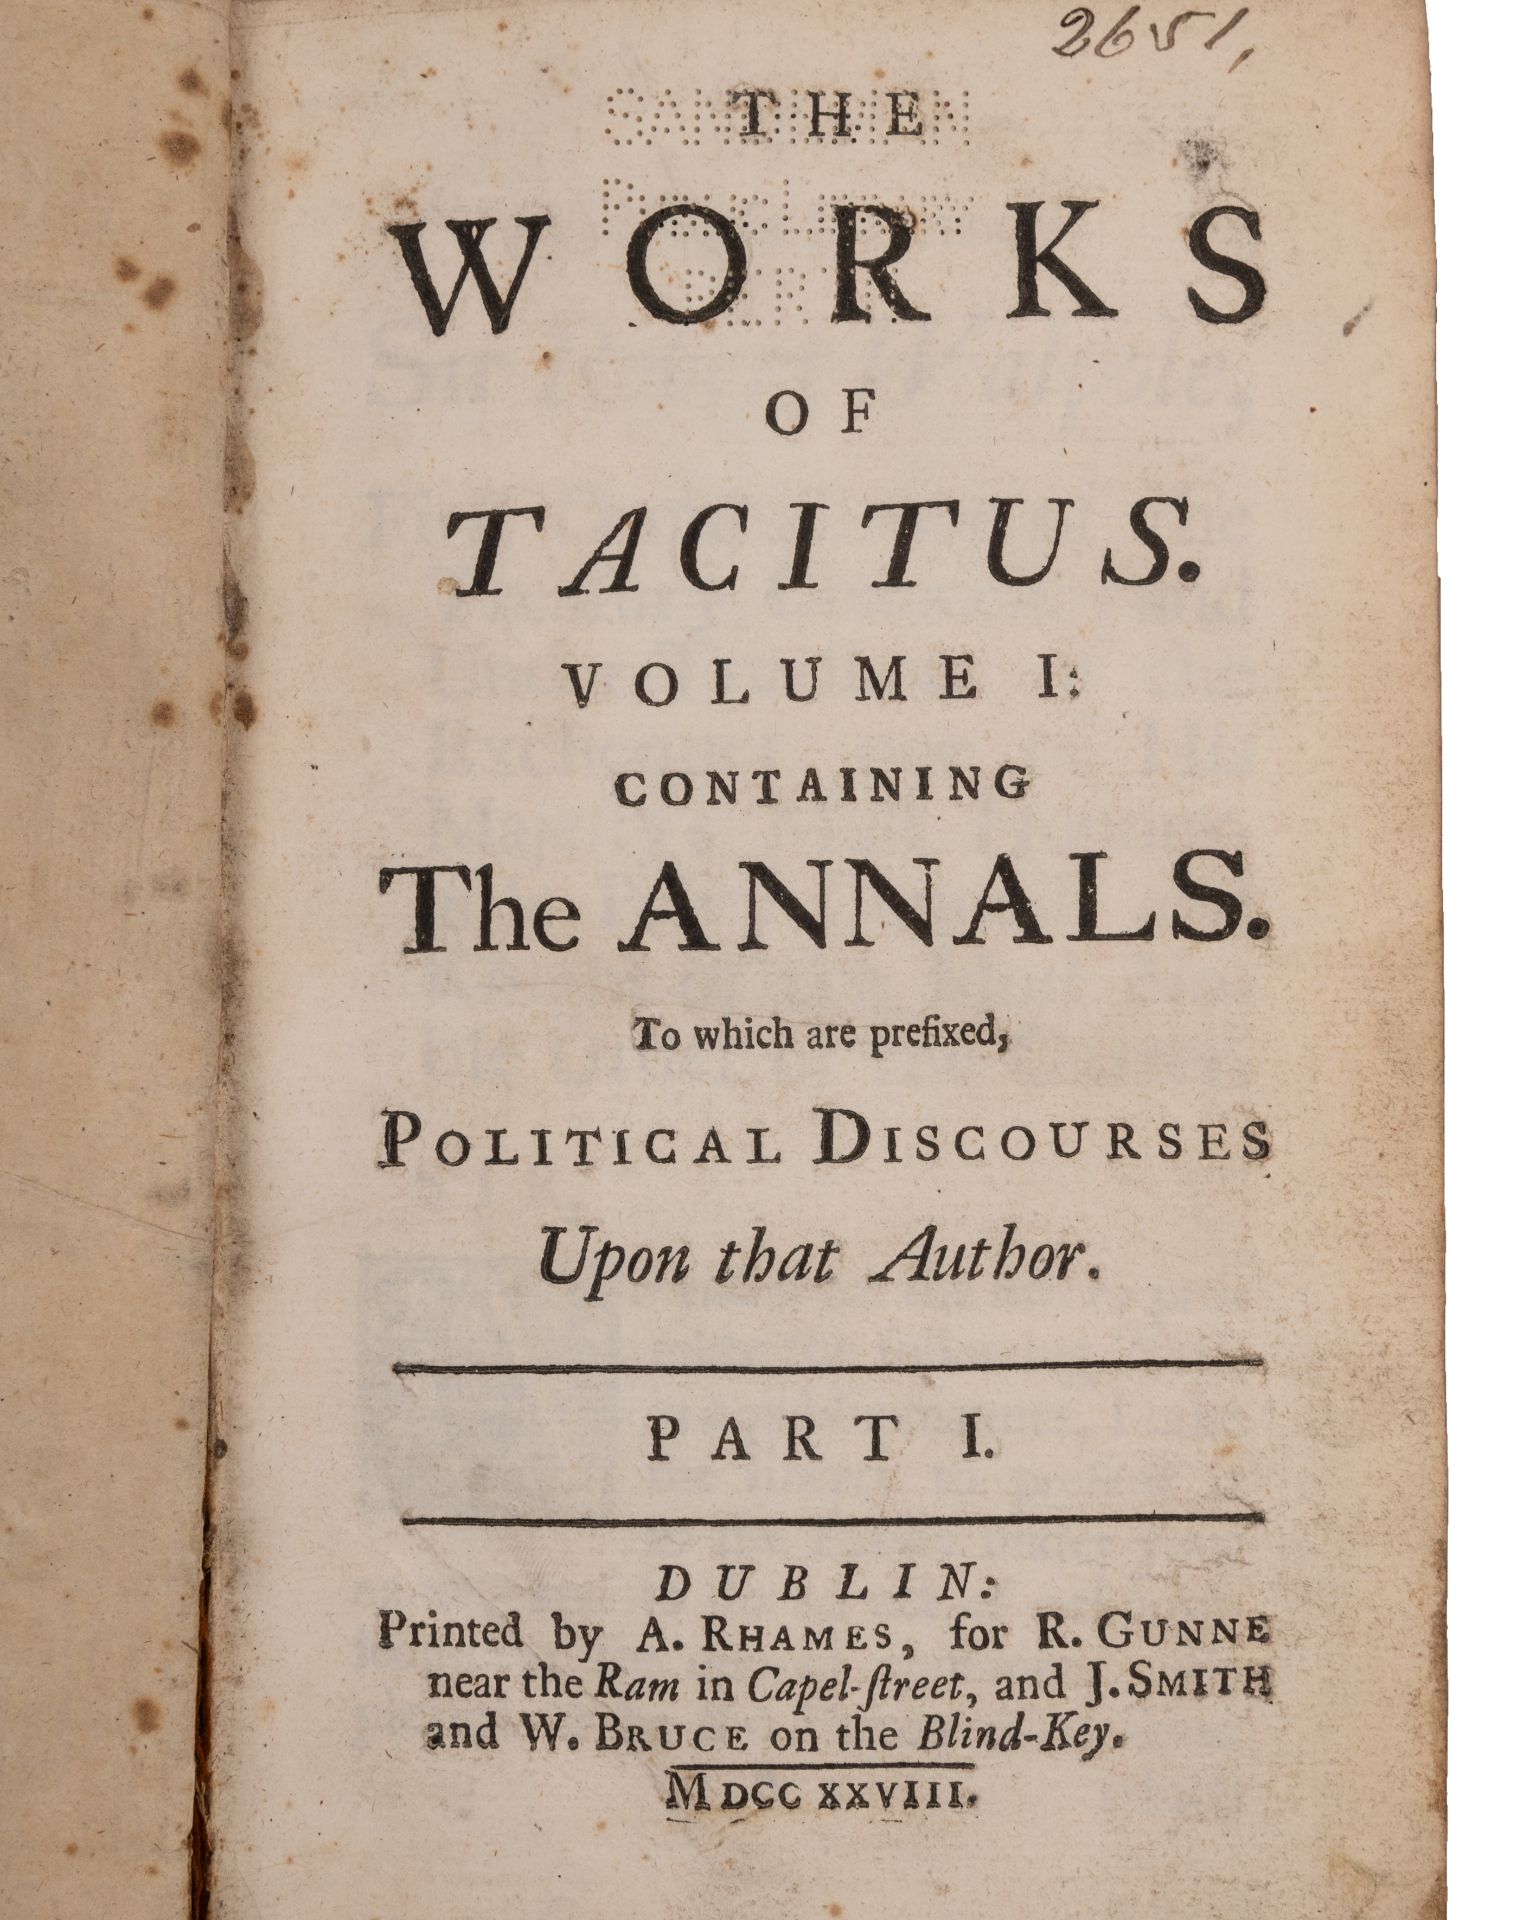 Tacitus-The Works - 4 vols with dedication to Sir Robert Walpole. Gunne et al, Dublin 1728. 4to. - Image 2 of 2